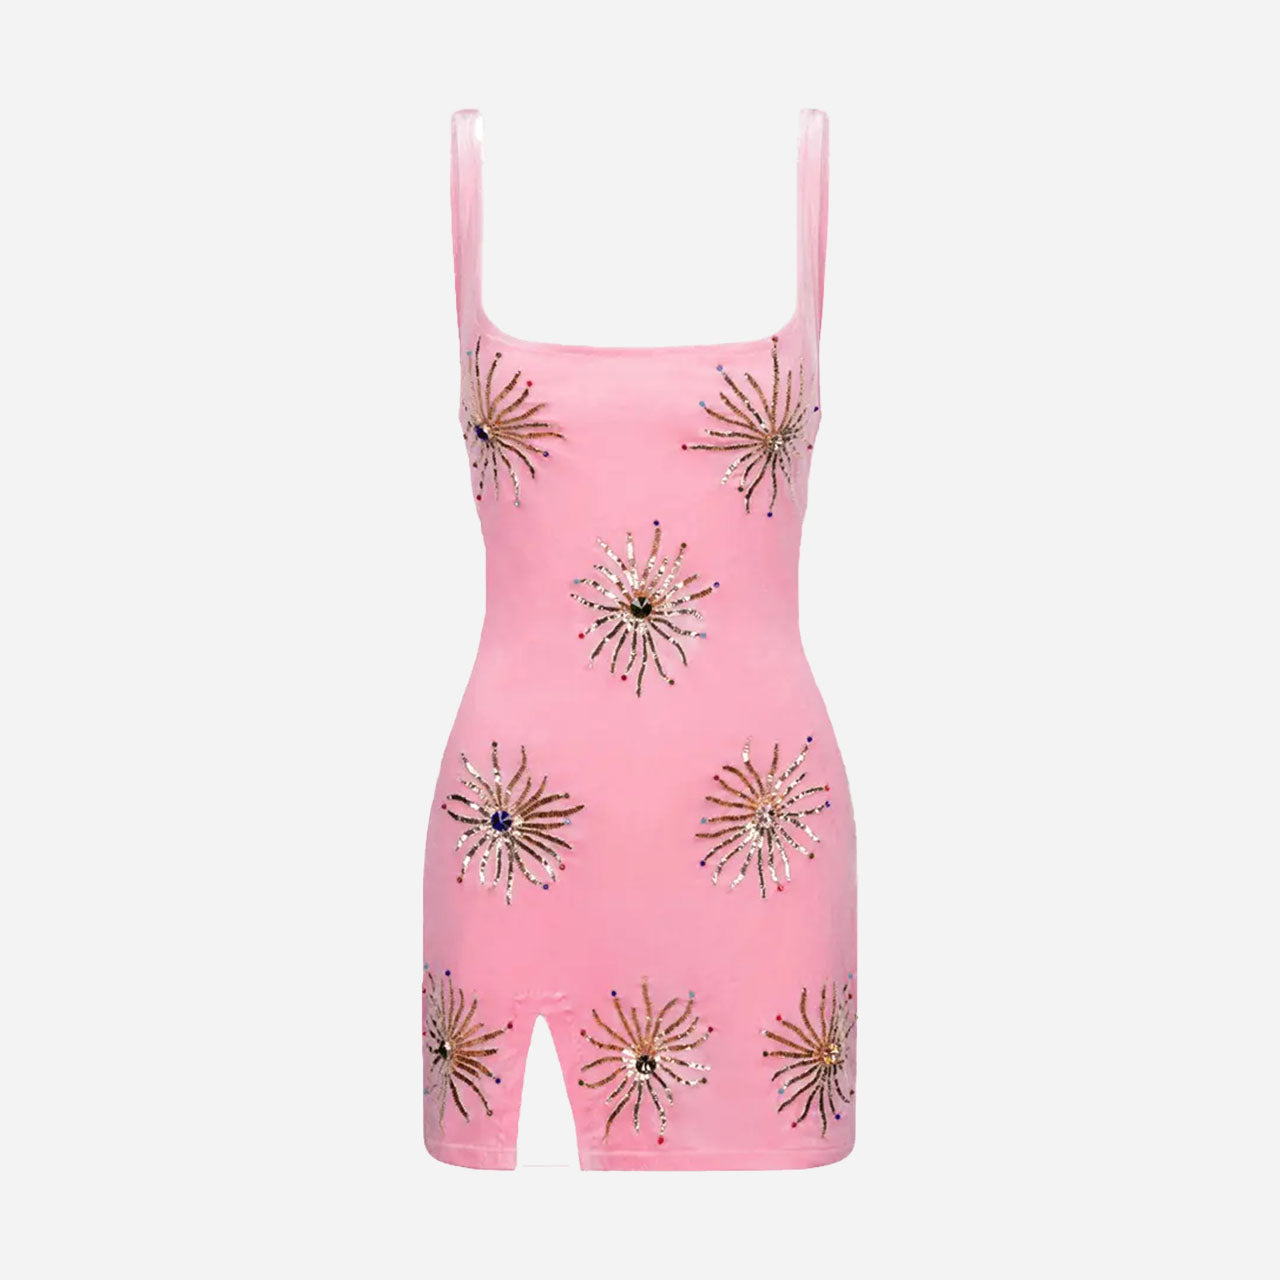 Callie Luxury Embellished Pink Party Dress